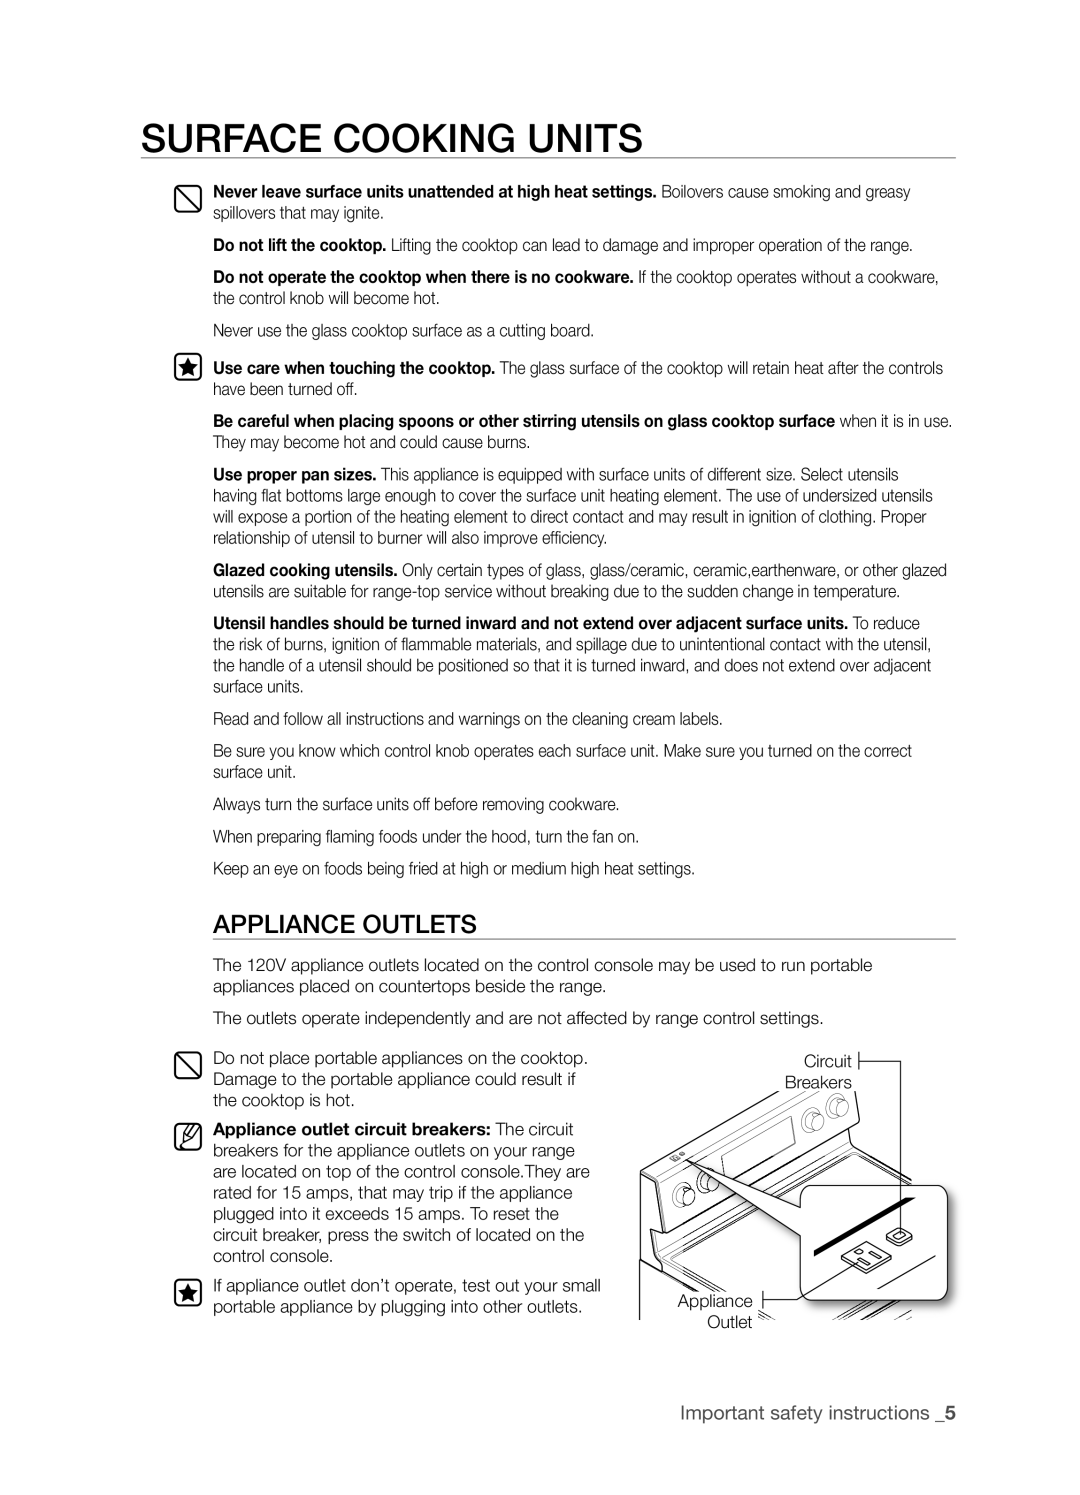 Samsung FTQ352IWX user manual Surface Cooking Units, Appliance Outlets, Important safety instructions _5 